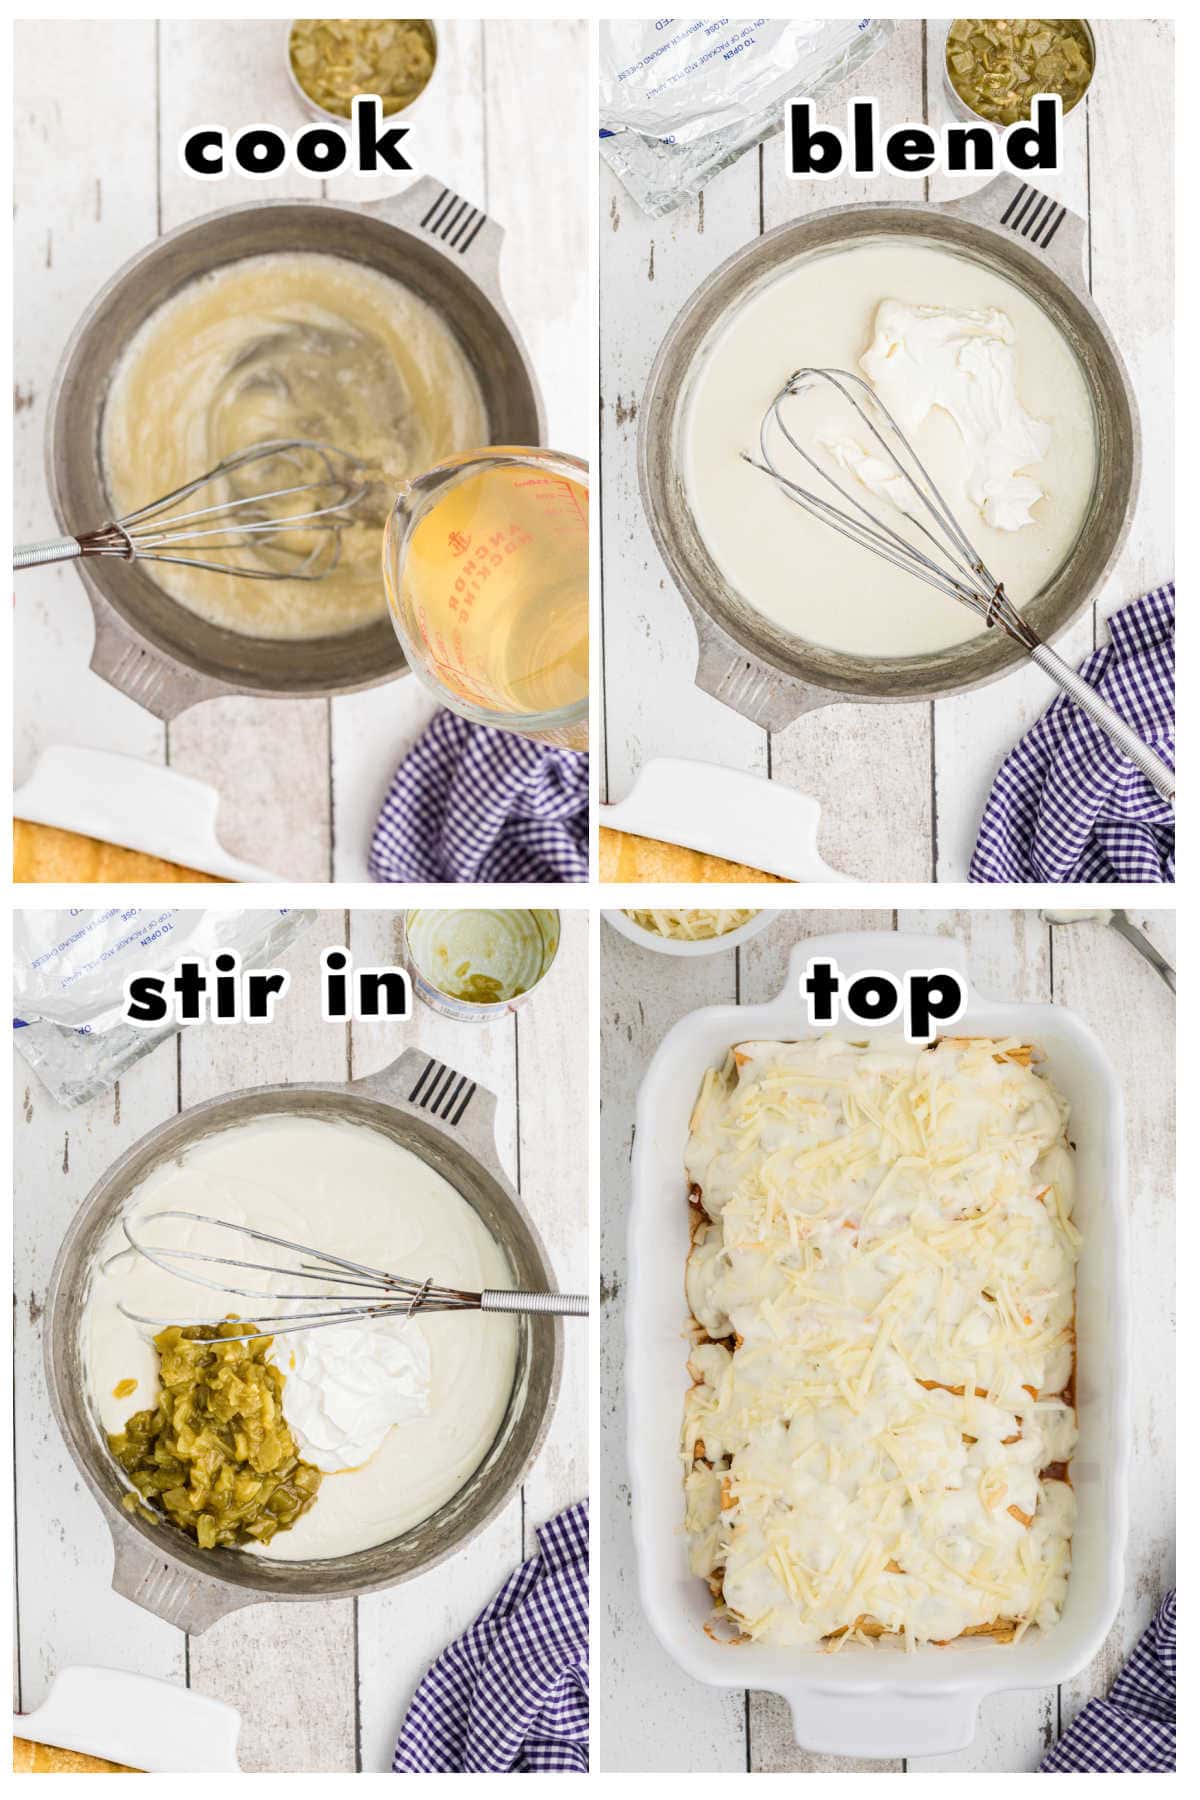 Step by step images showing how to make cream sauce for enchiladas.